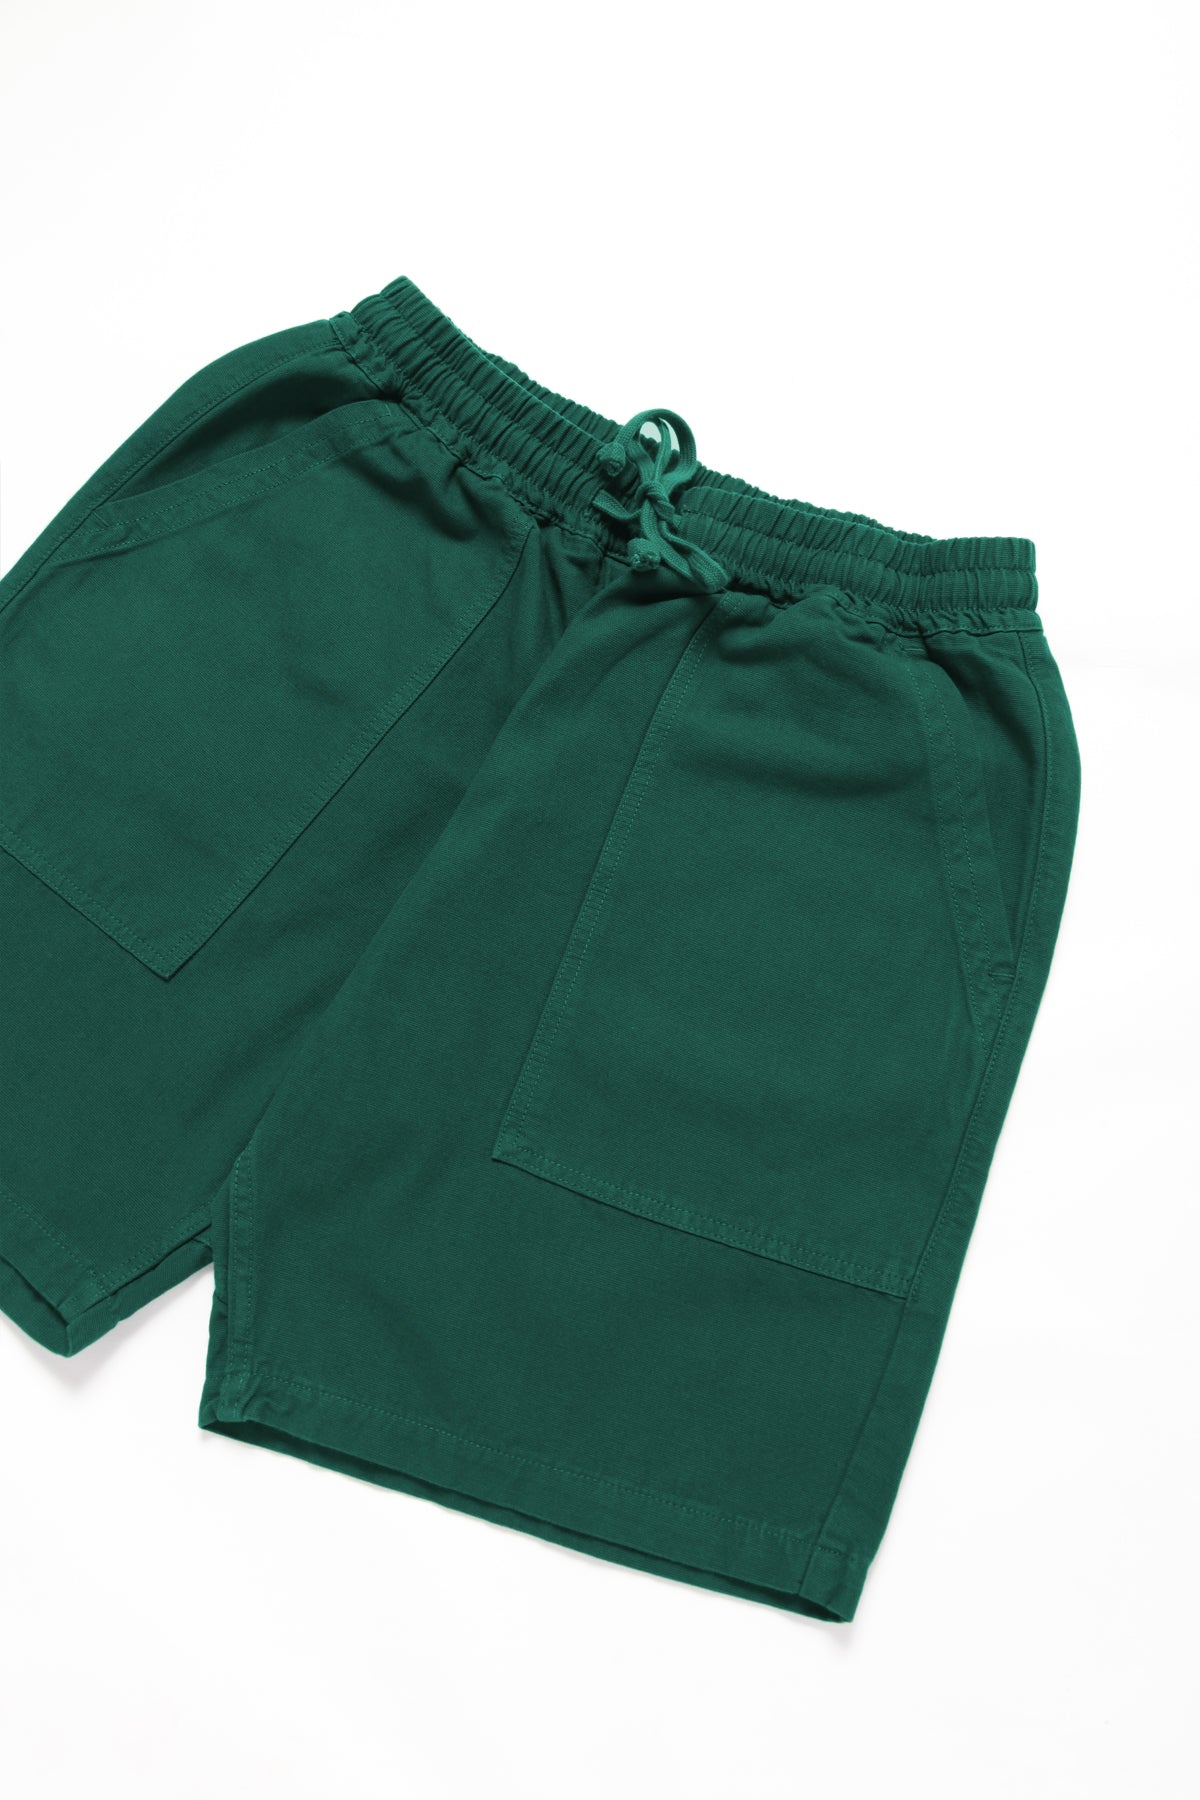 Service Works - Classic Chef Shorts - Teal